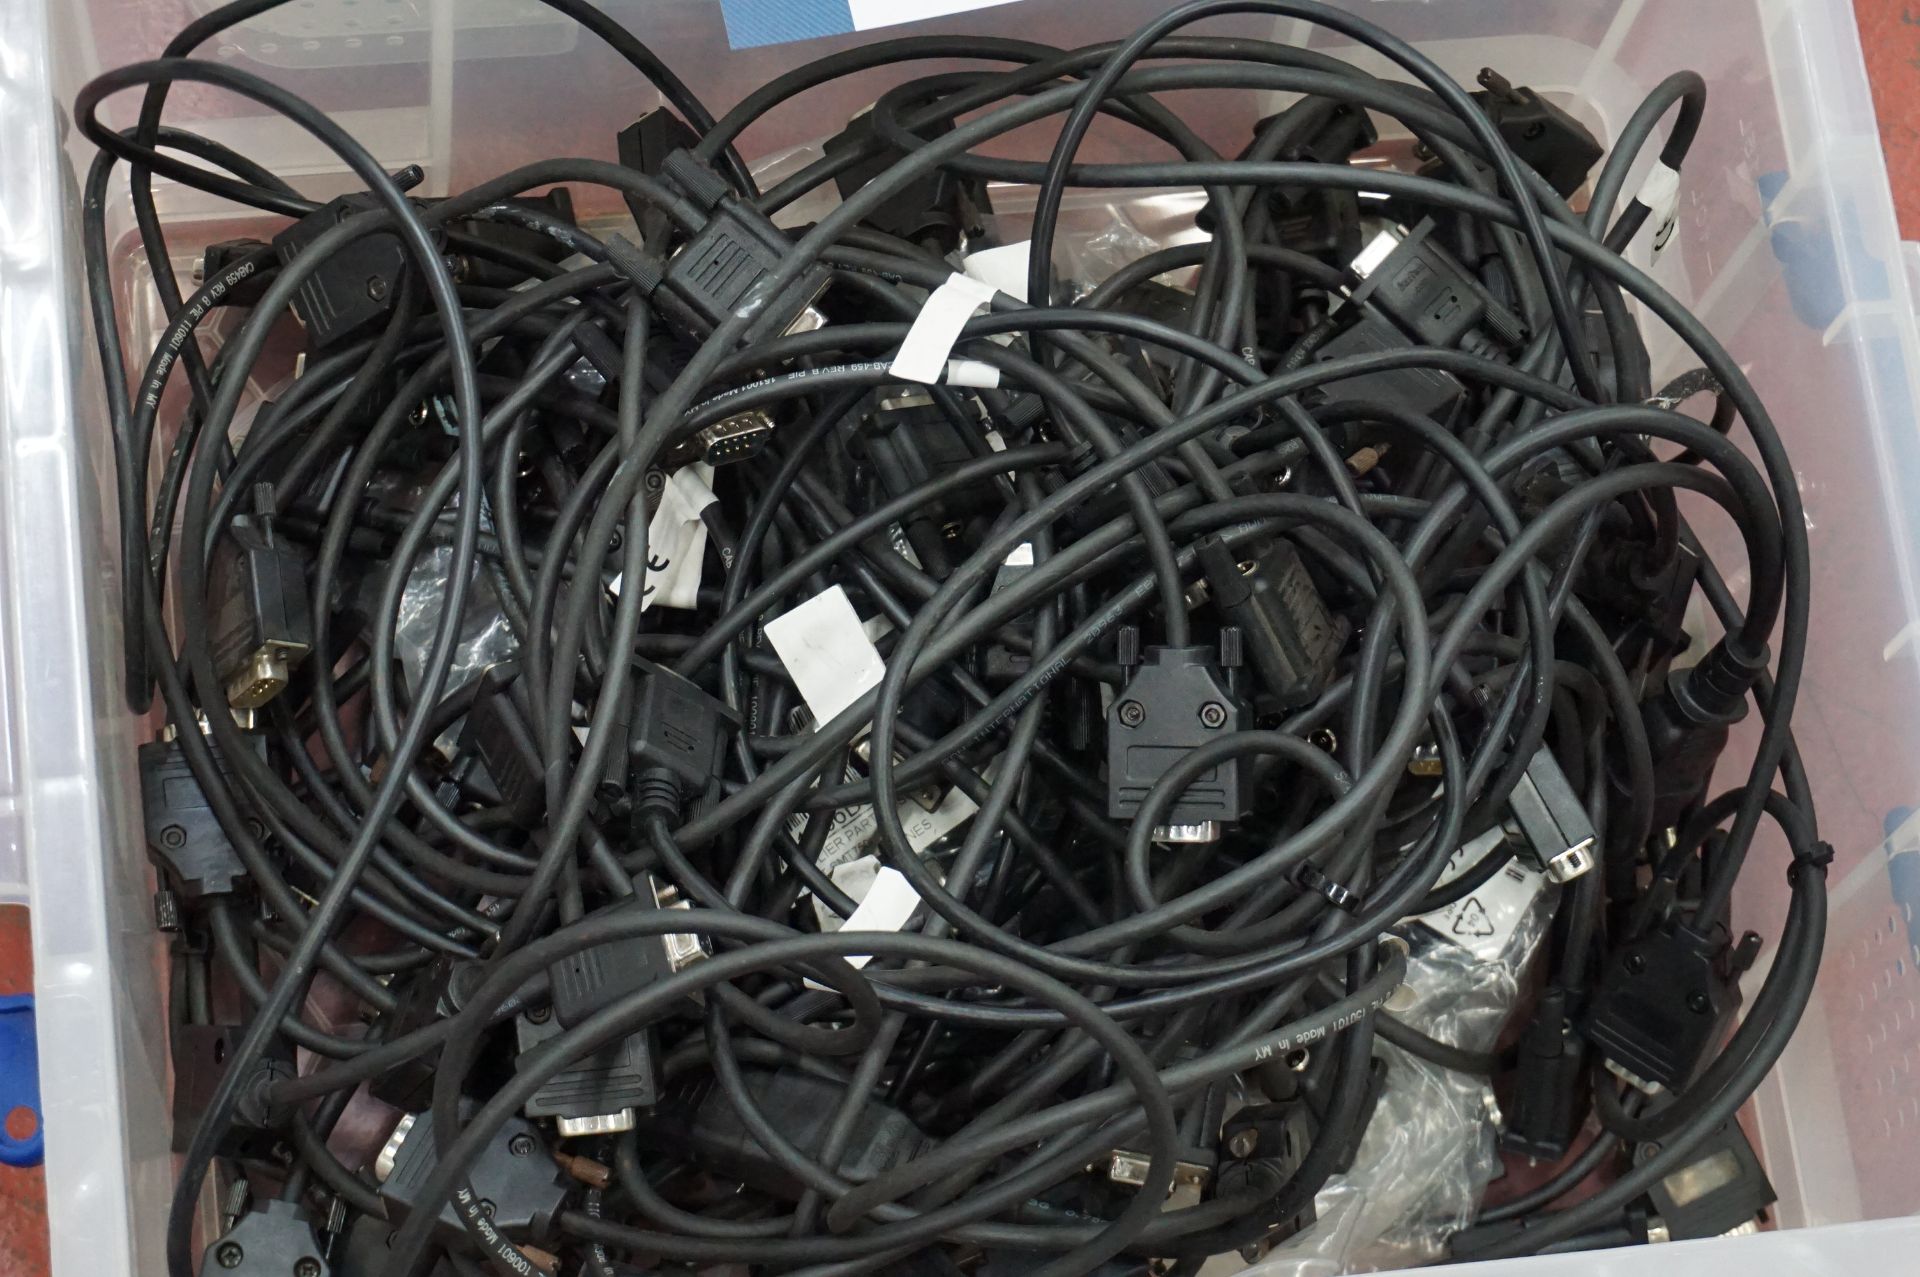 Quantity of replacement VGA cables - Image 3 of 3